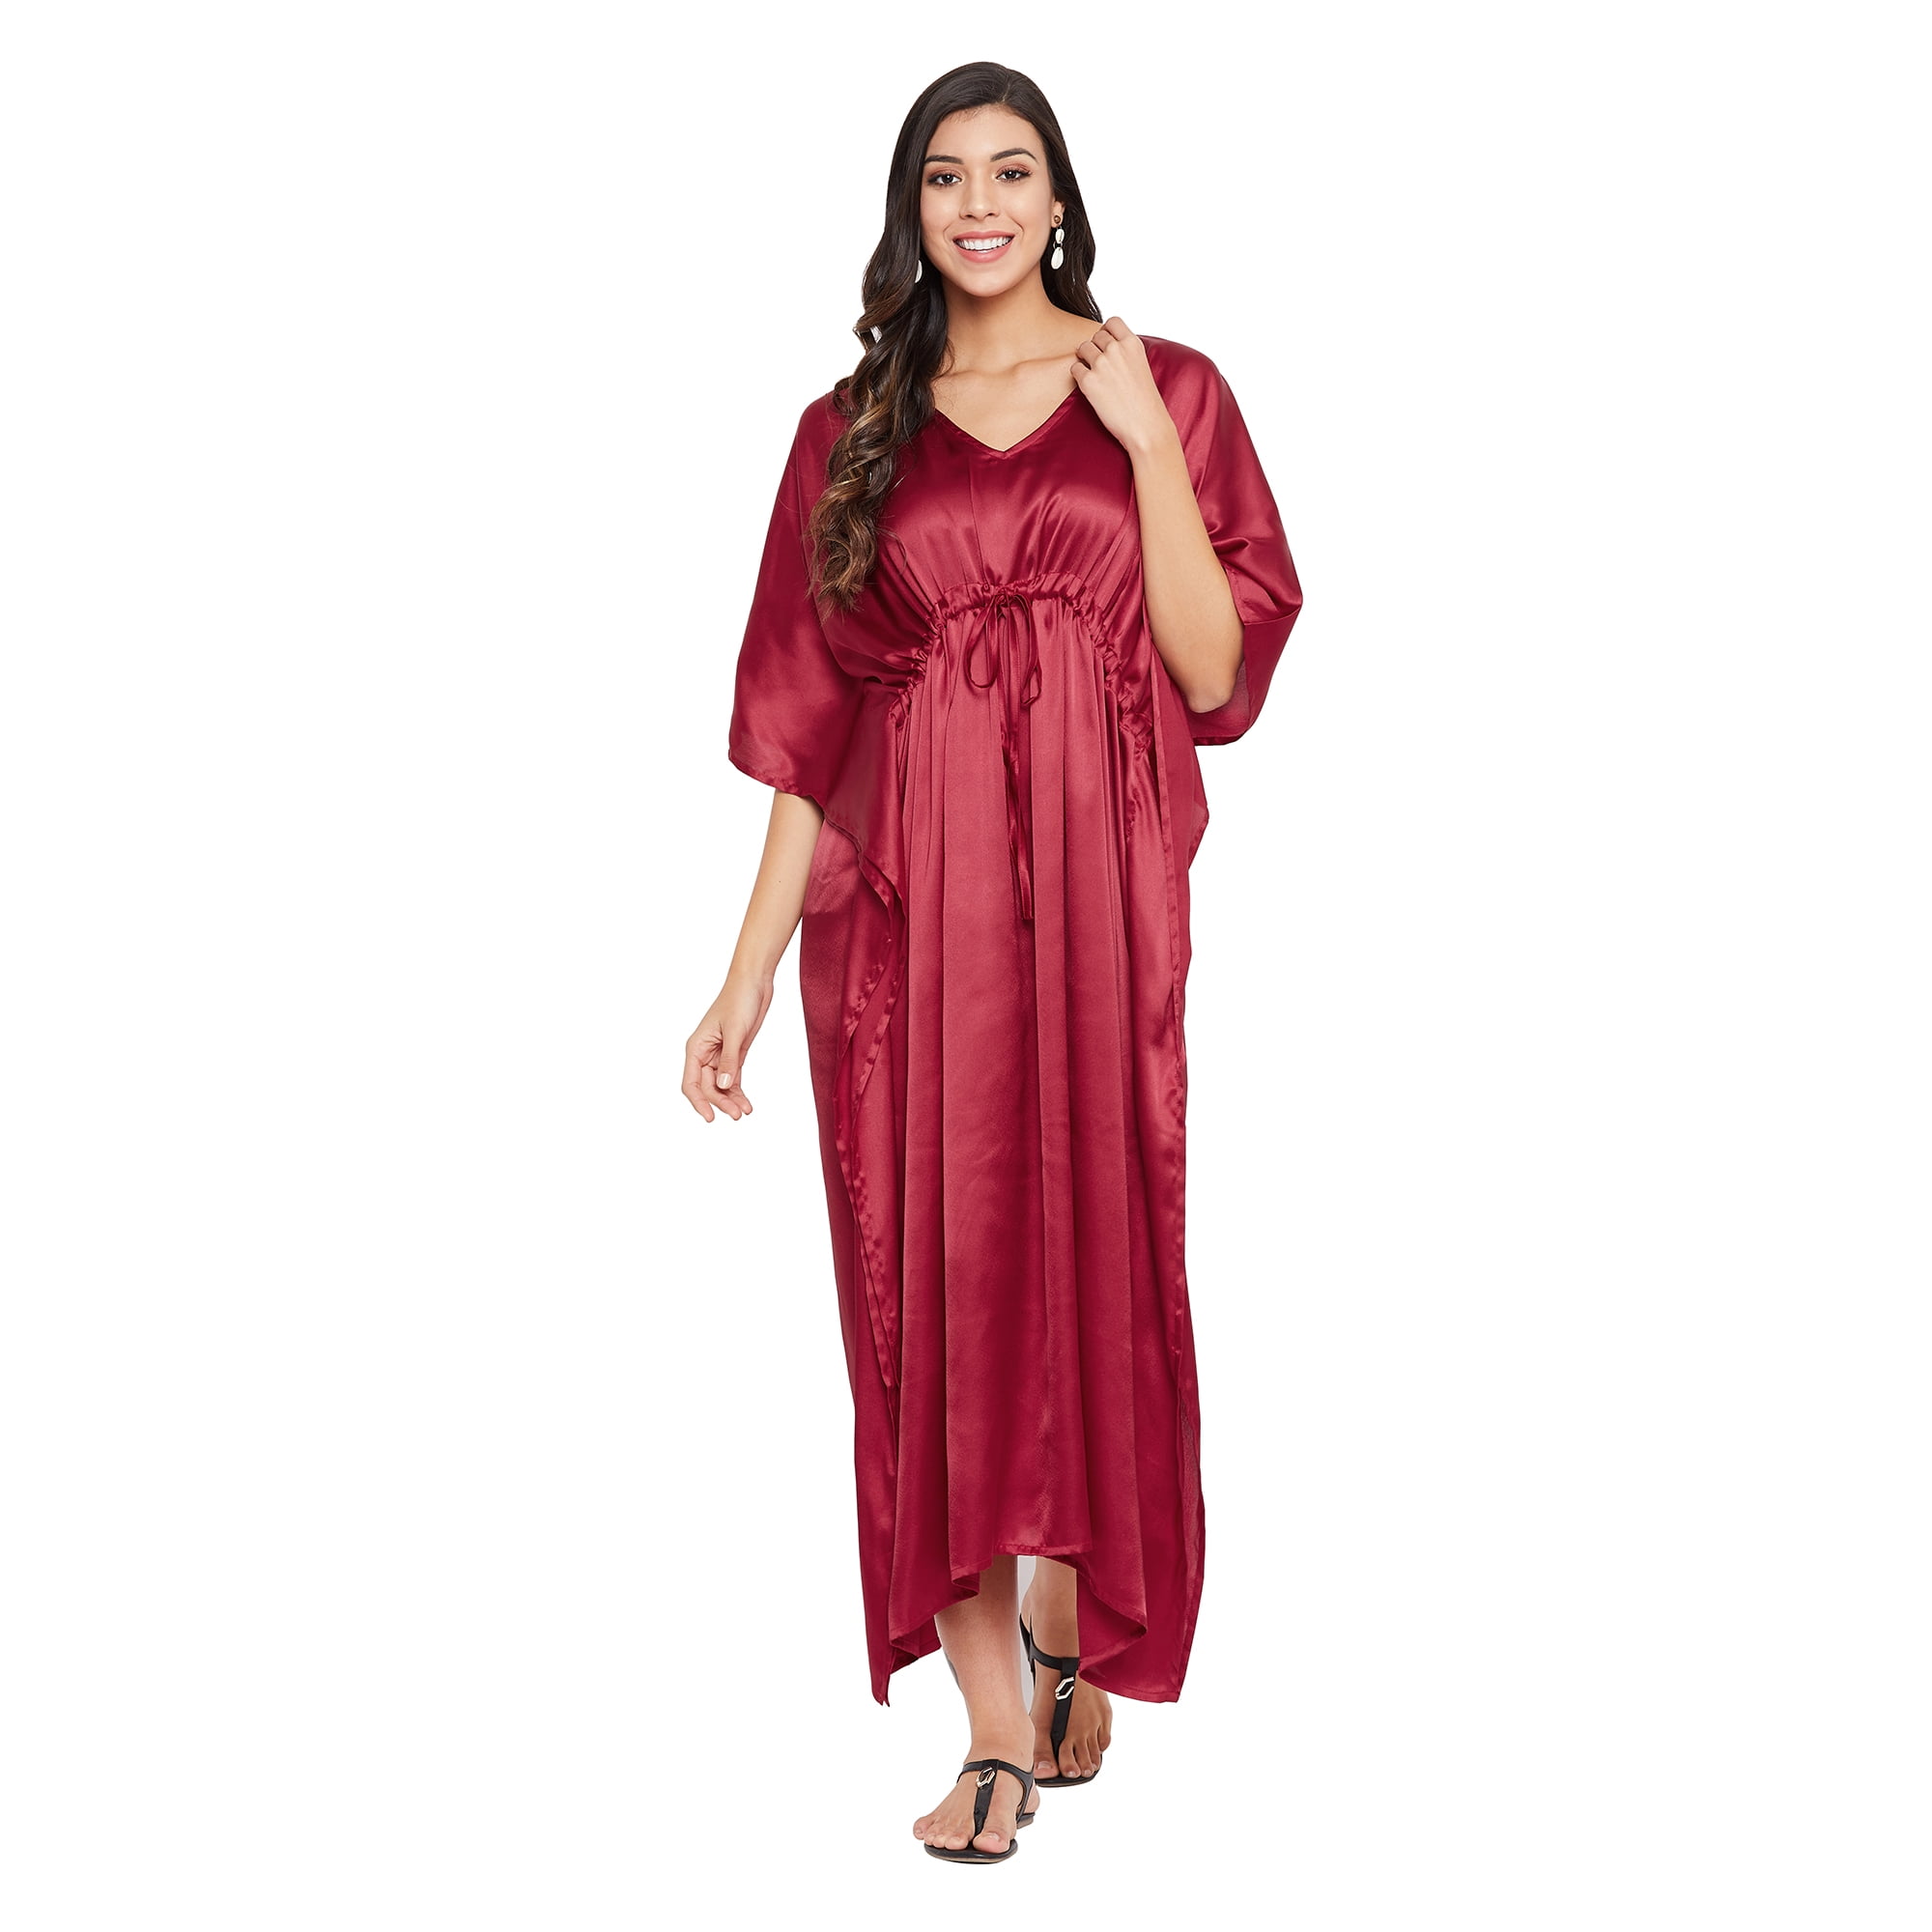 Casual Indian Dresses - Buy Casual Indian Clothing Online in USA